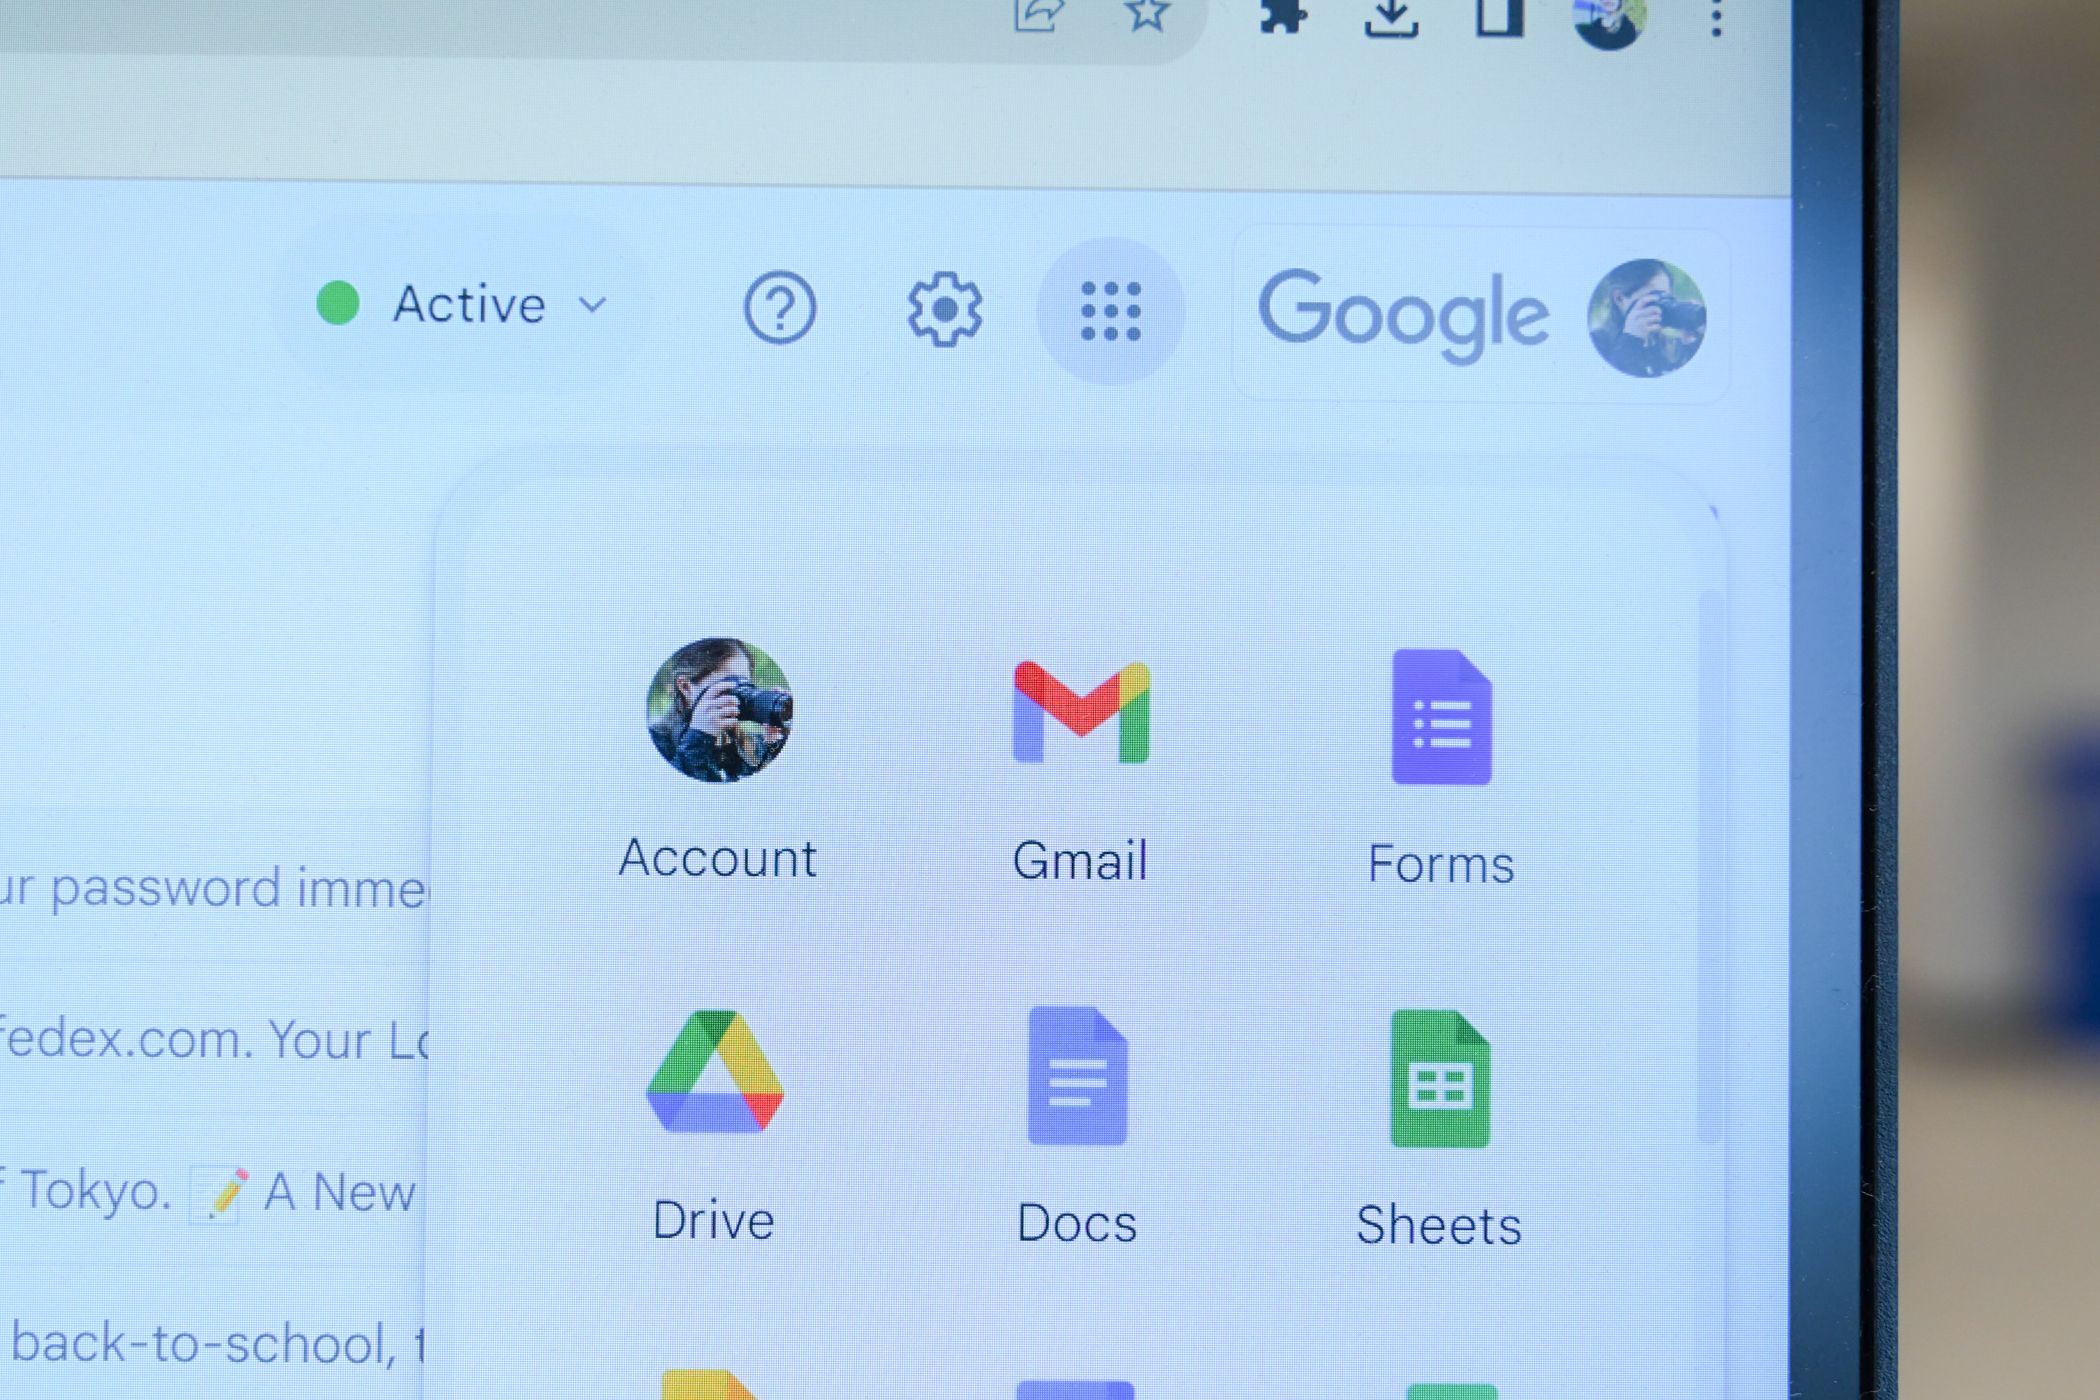 Some Google apps visible in Gmail